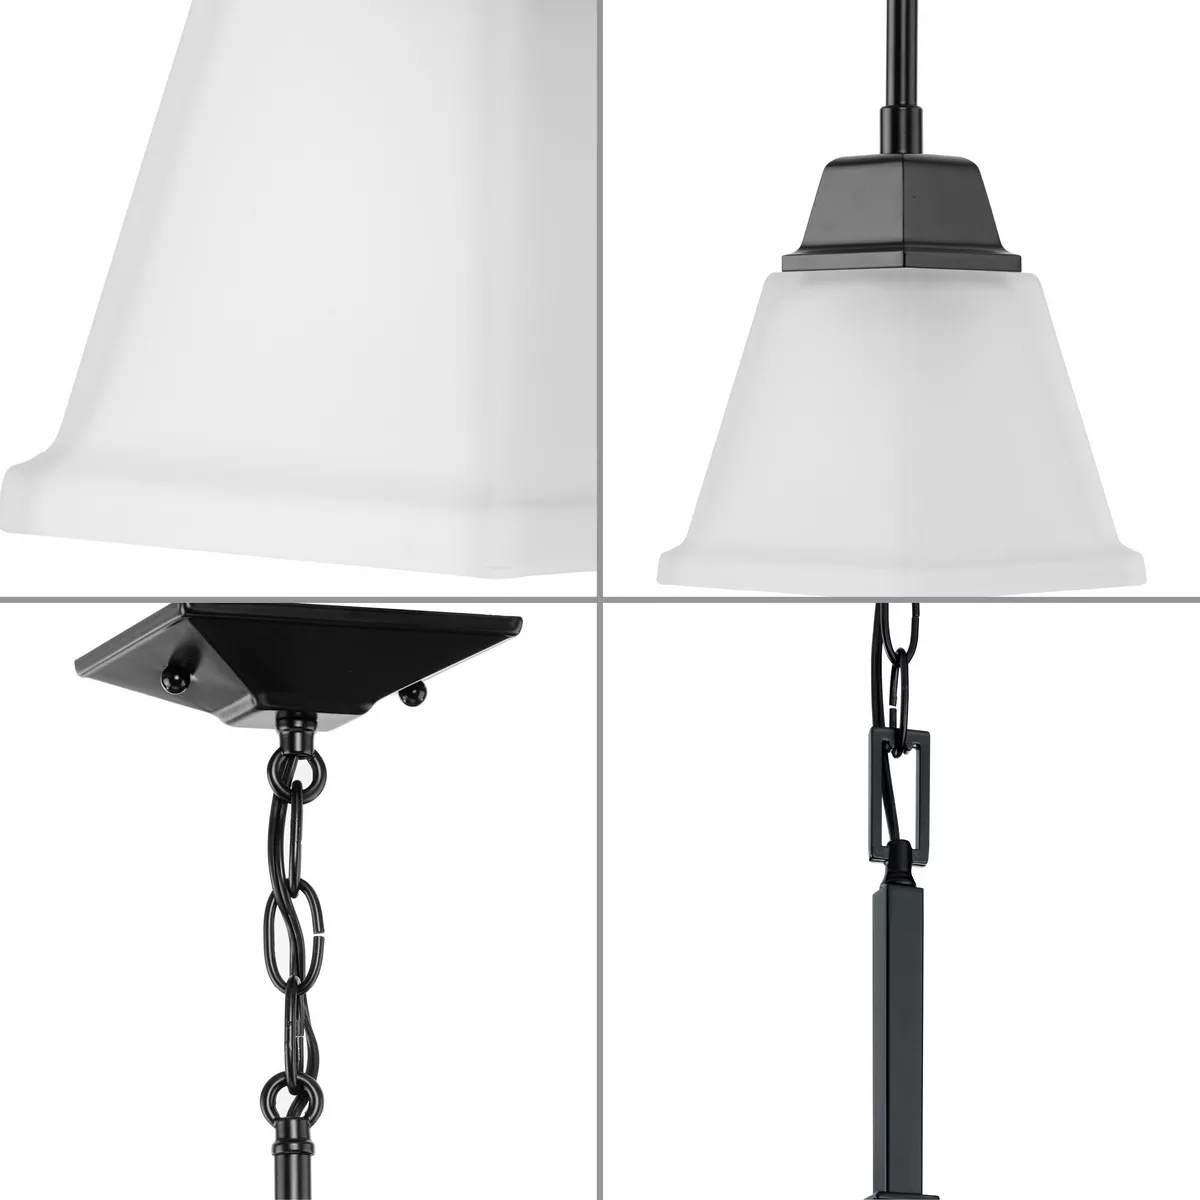 Clifton Heights 6 in. Pendant Light